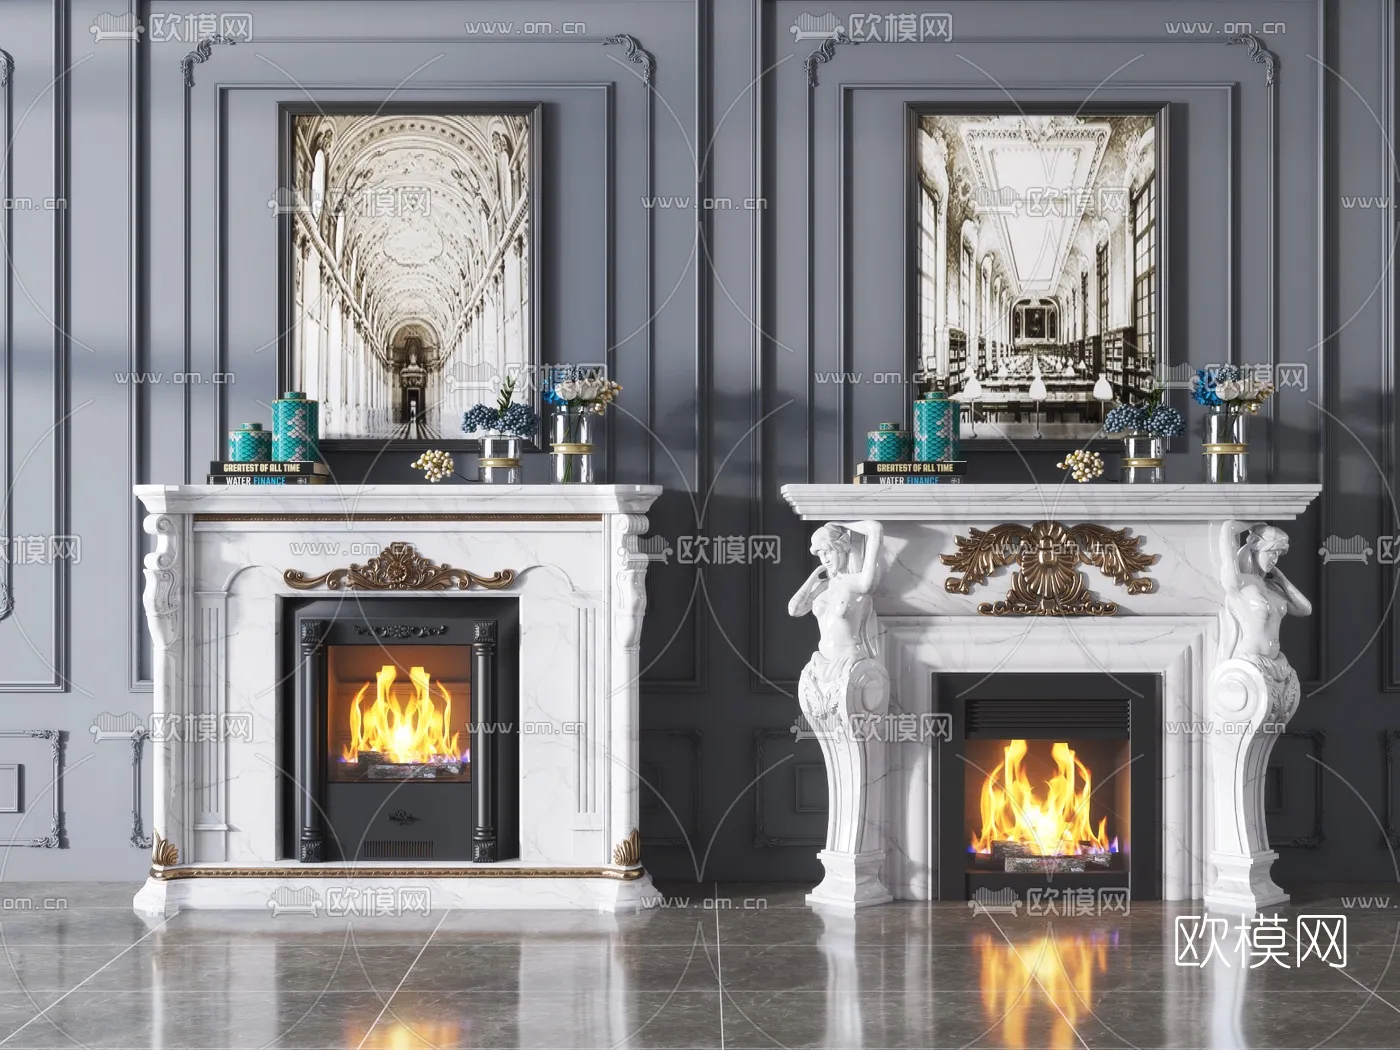 CLASSIC – FIREPLACE 3DMODELS – 042